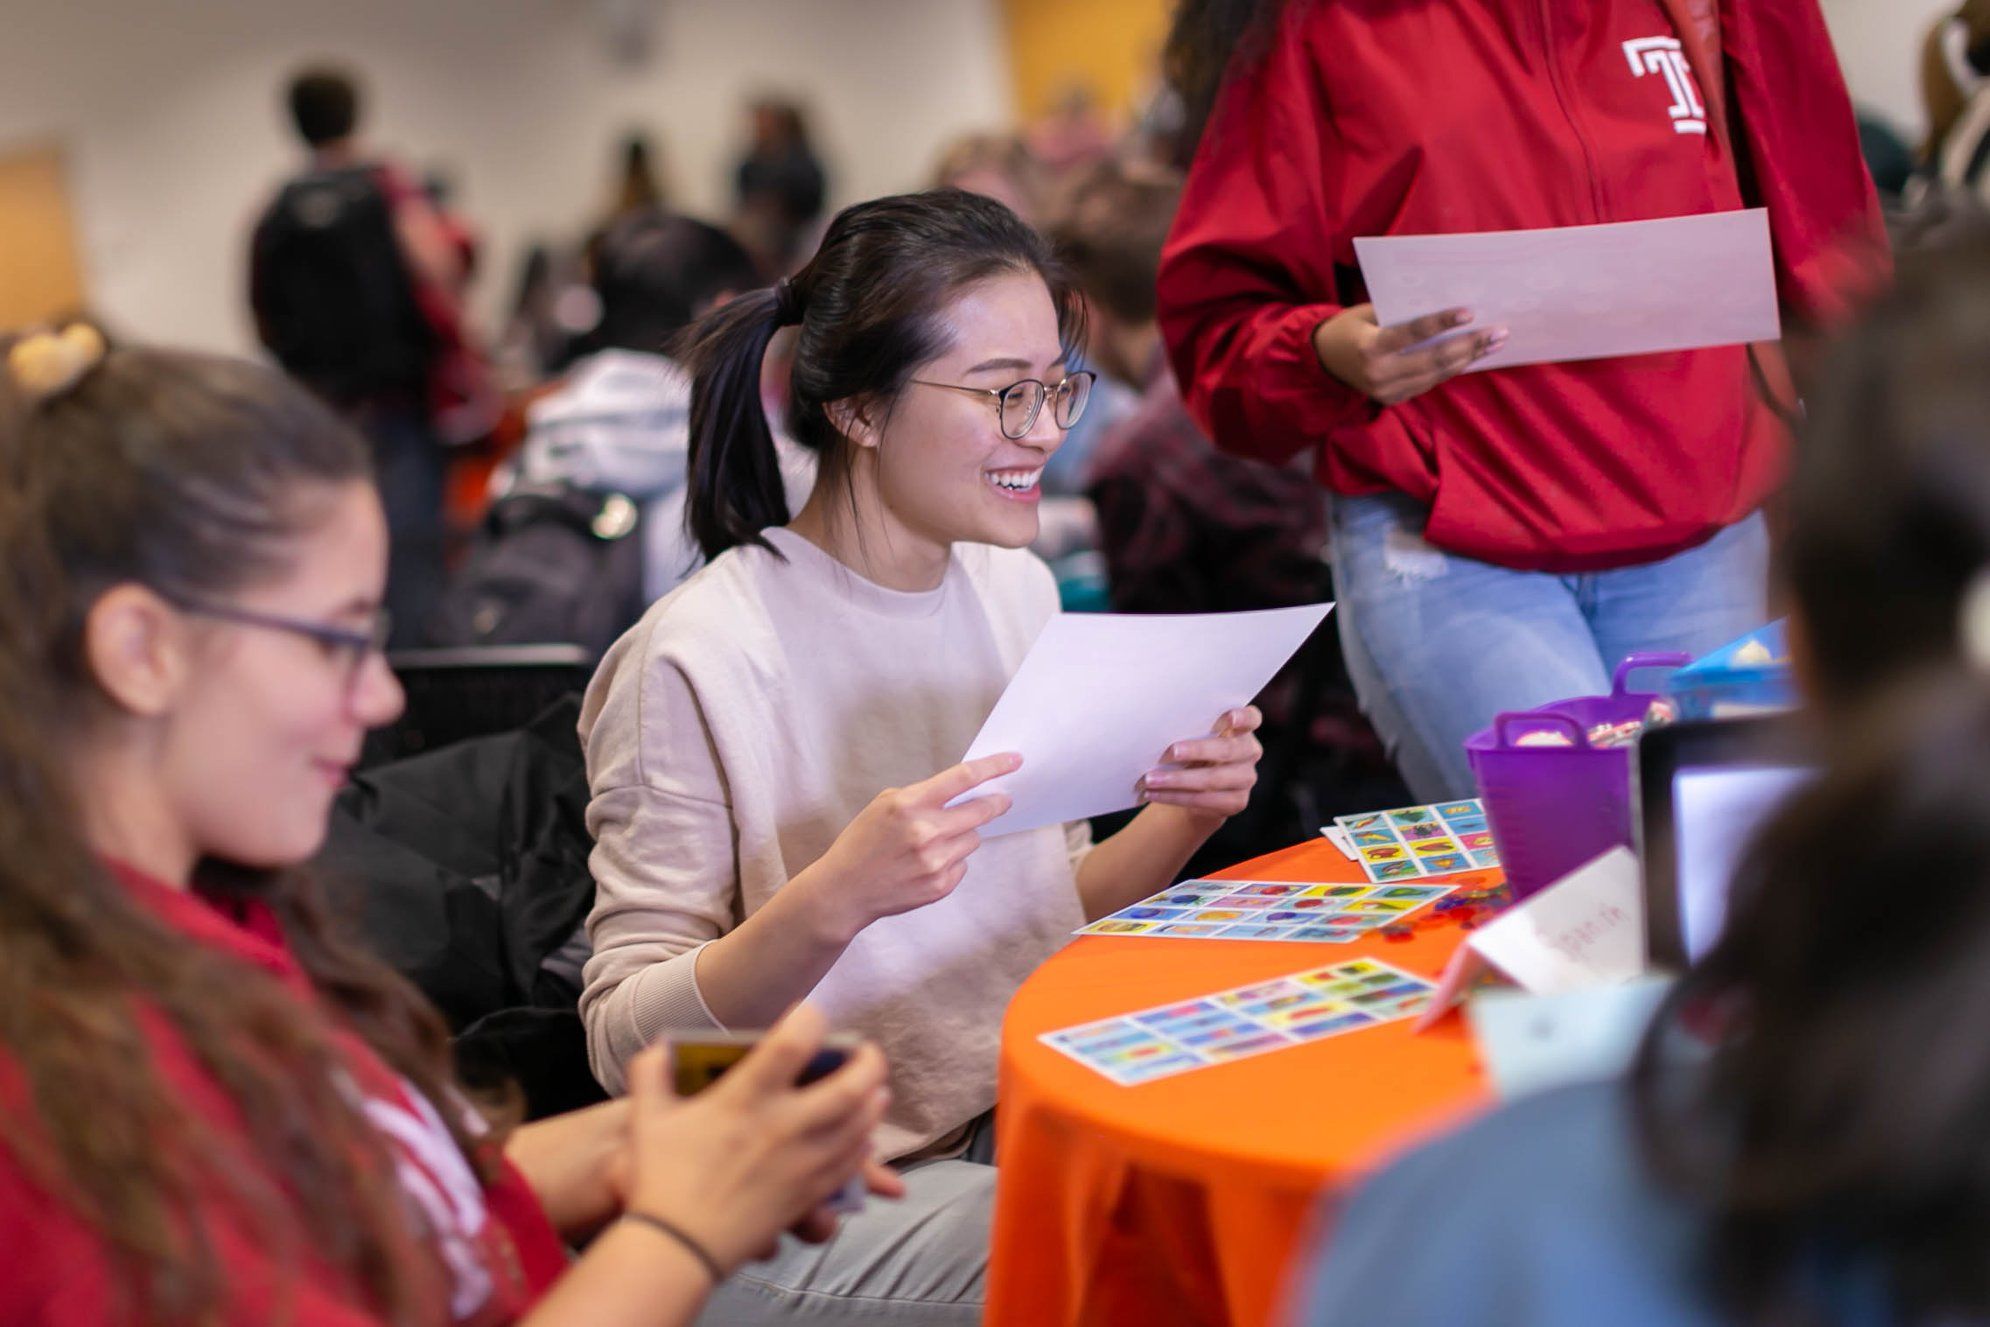 Student enjoying activities at Temple Lingo table